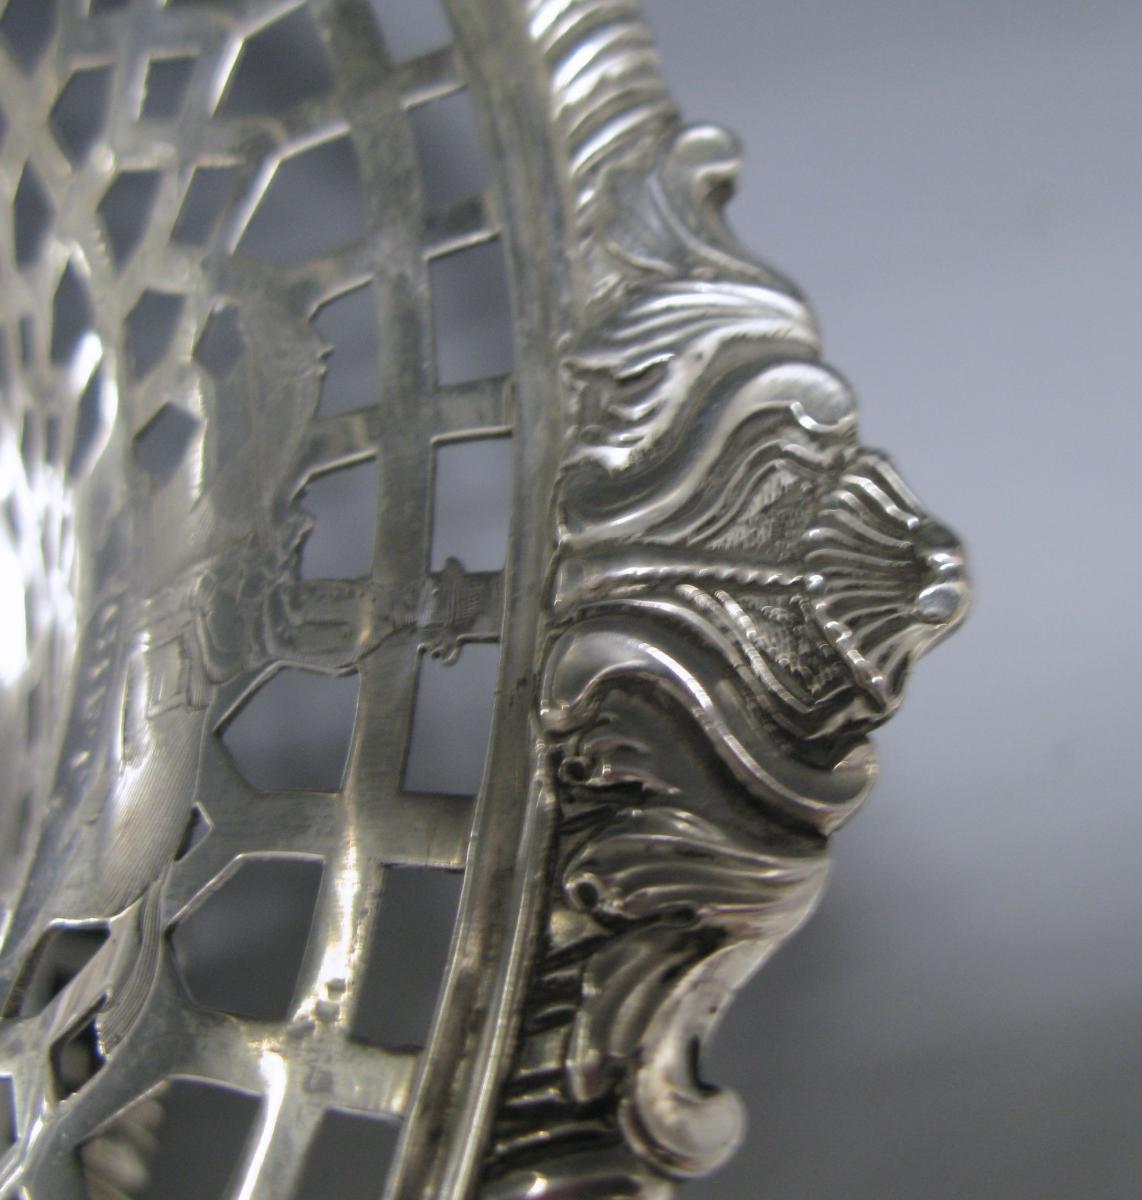 A George III Antique Silver Cake Basket